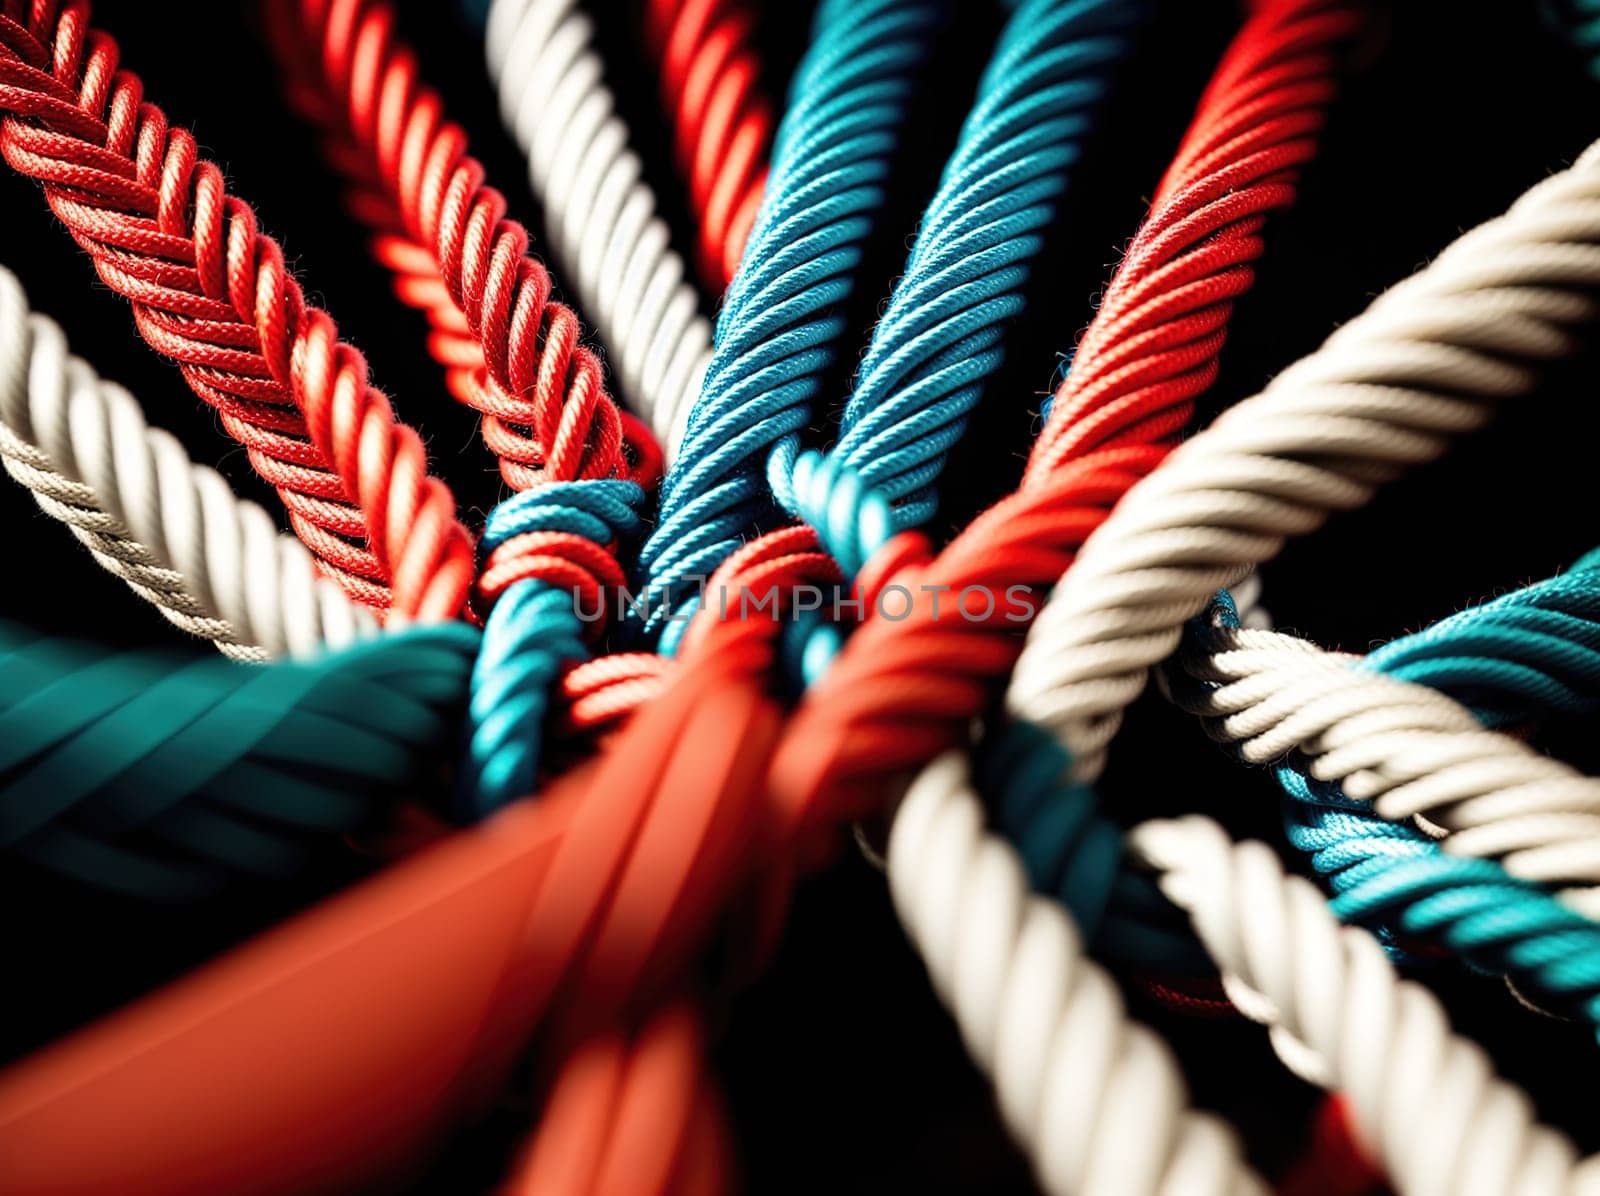 A rope made of different colors, including red, blue, and green. by creart